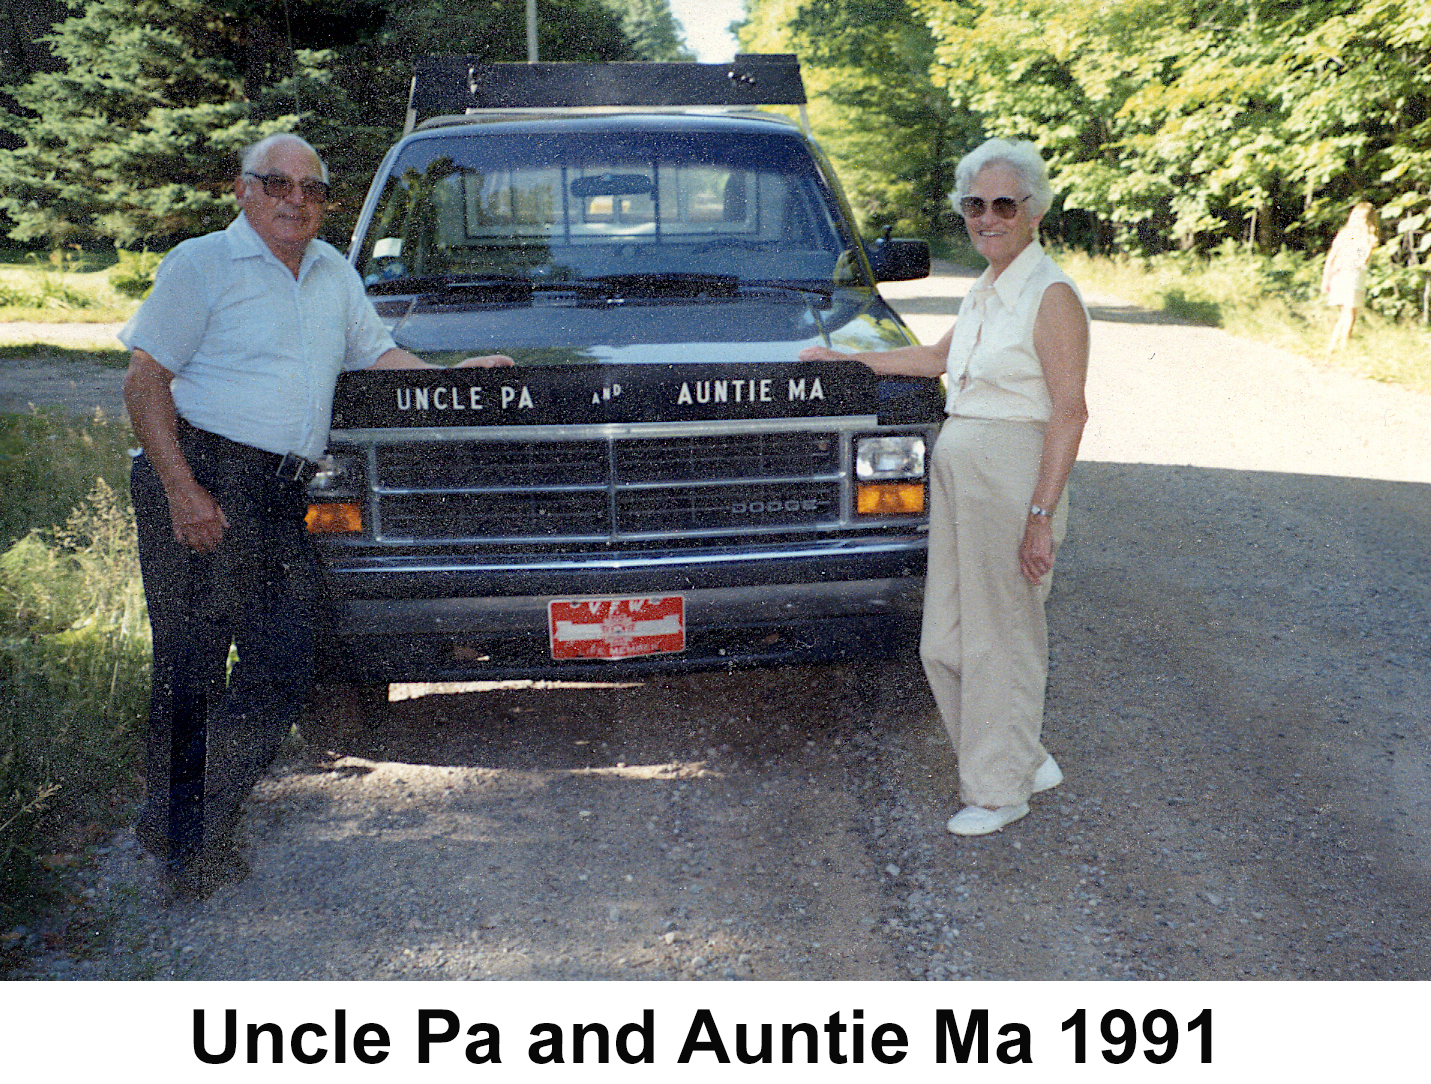 Murray and Helen Baker standing by their camping truck in 1991